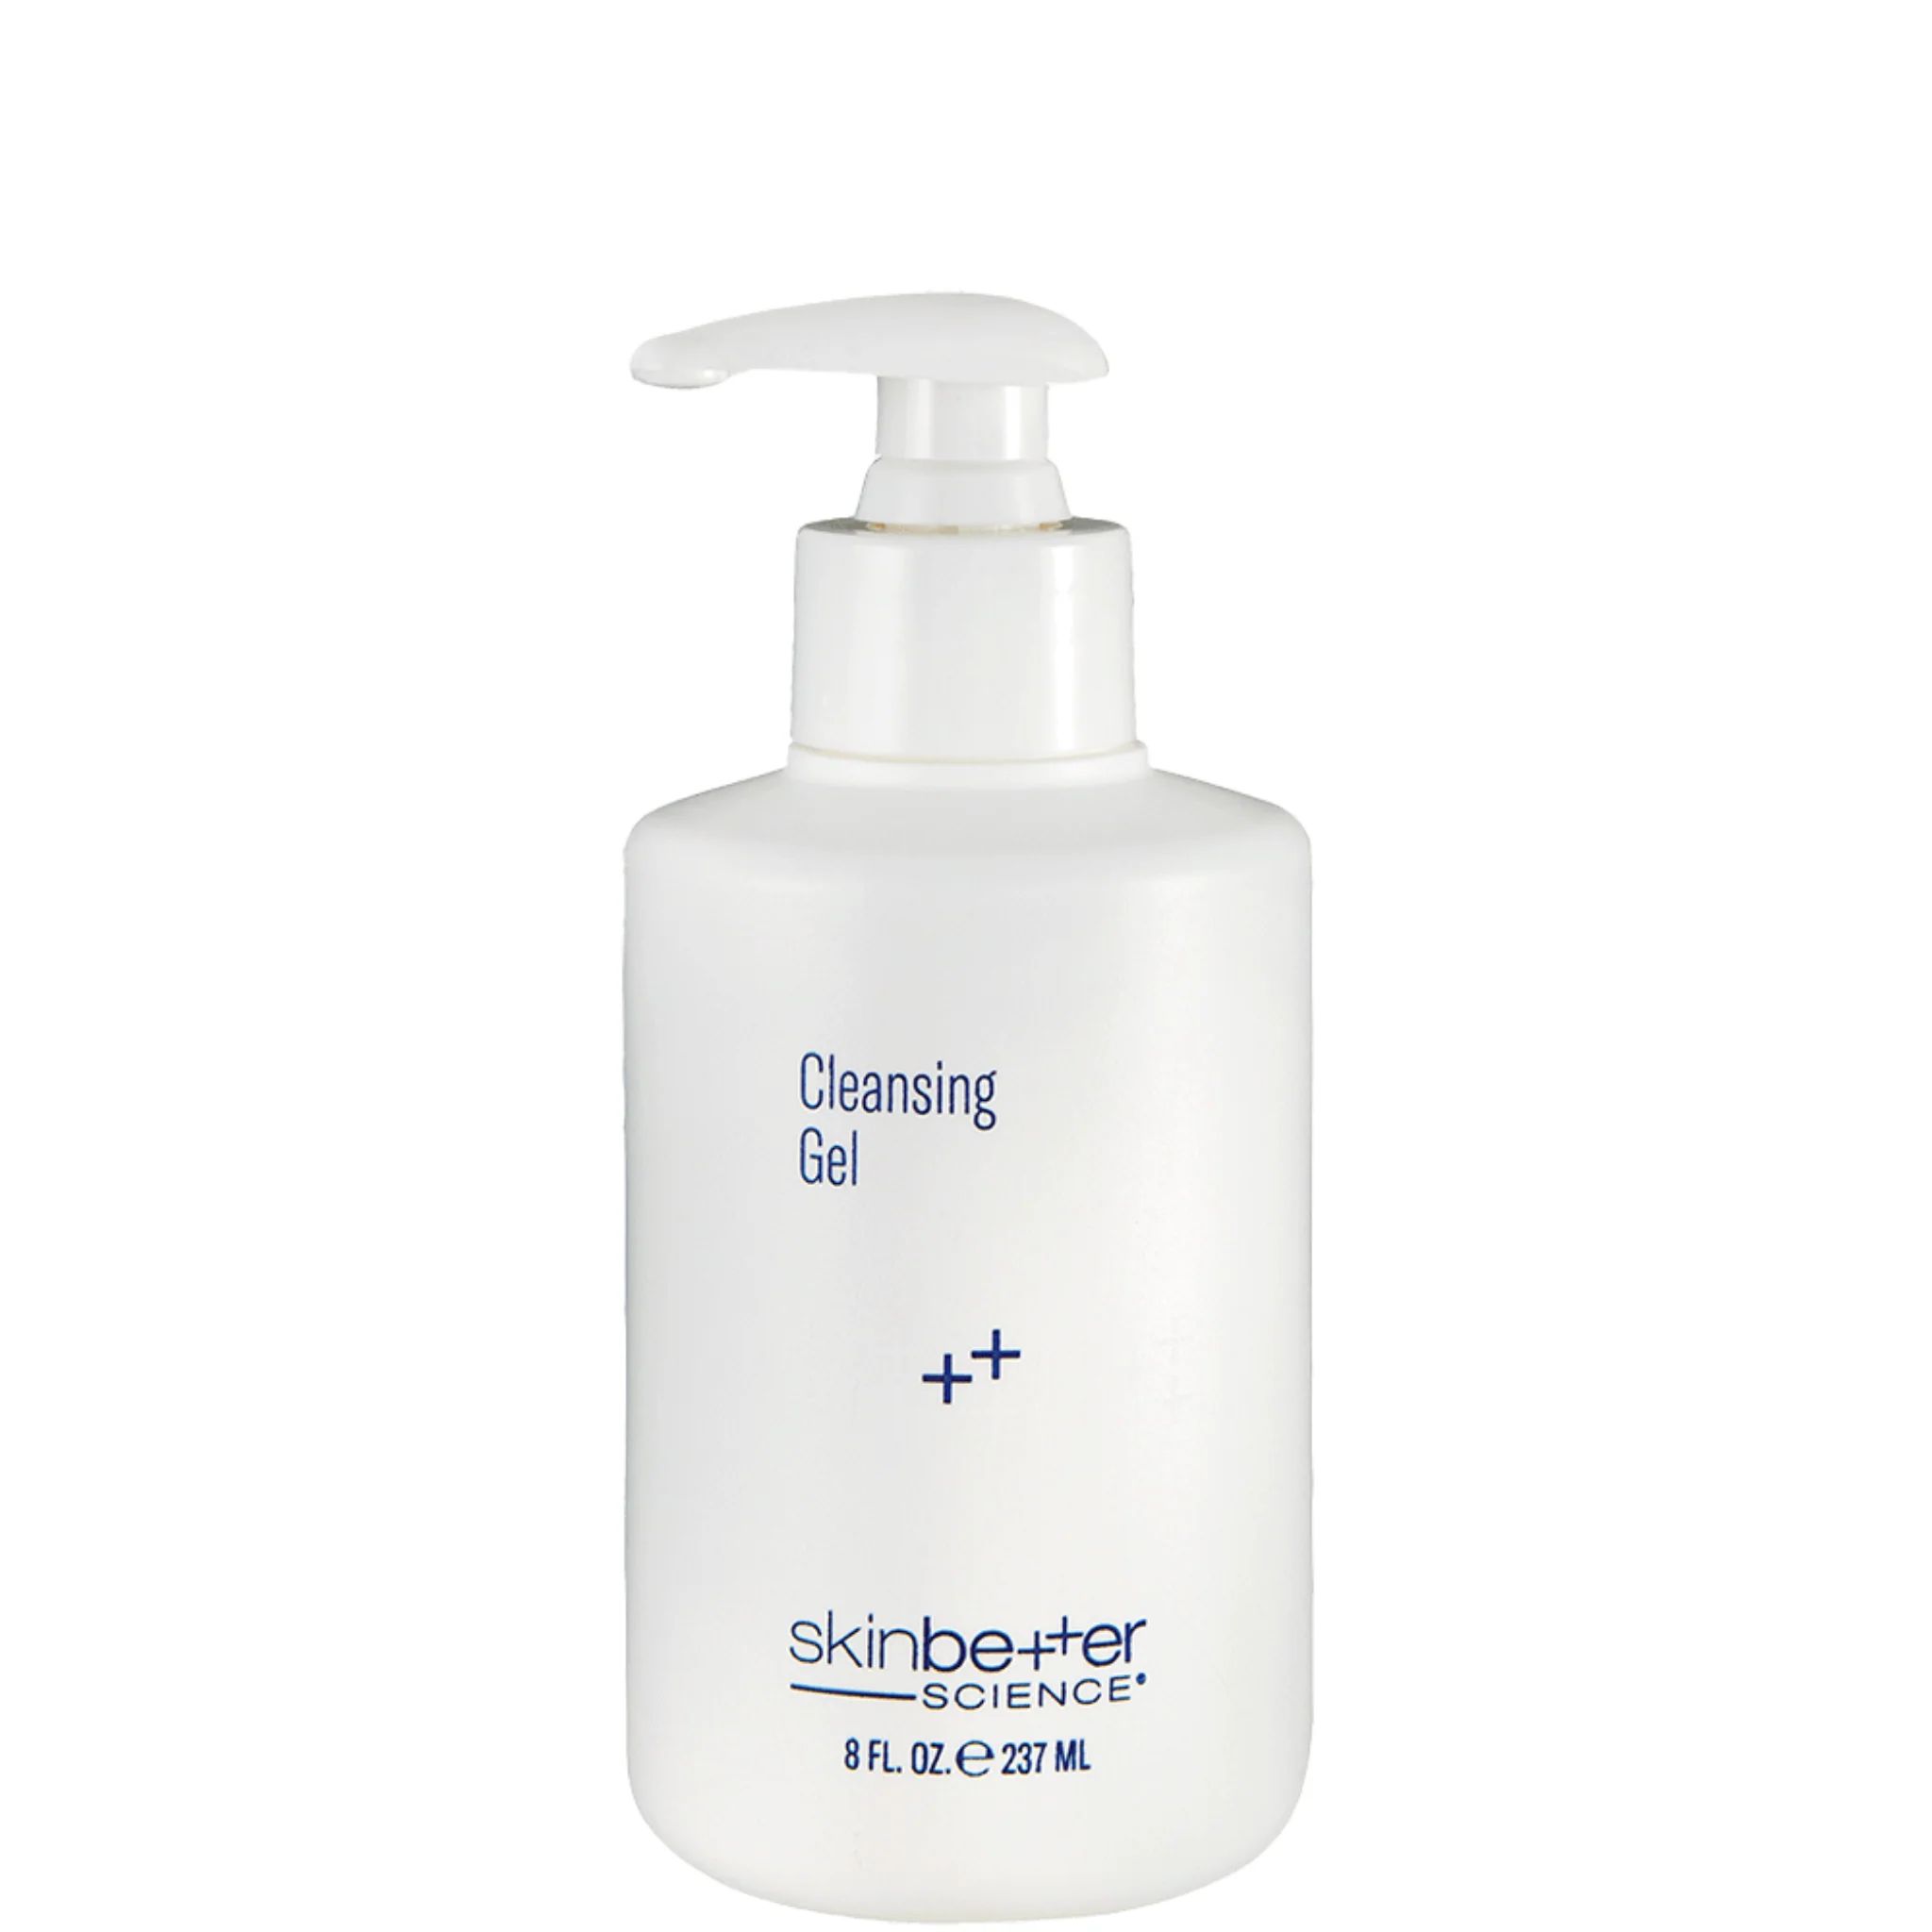 skinbetter science® Cleansing Gel | Crafted Beauty